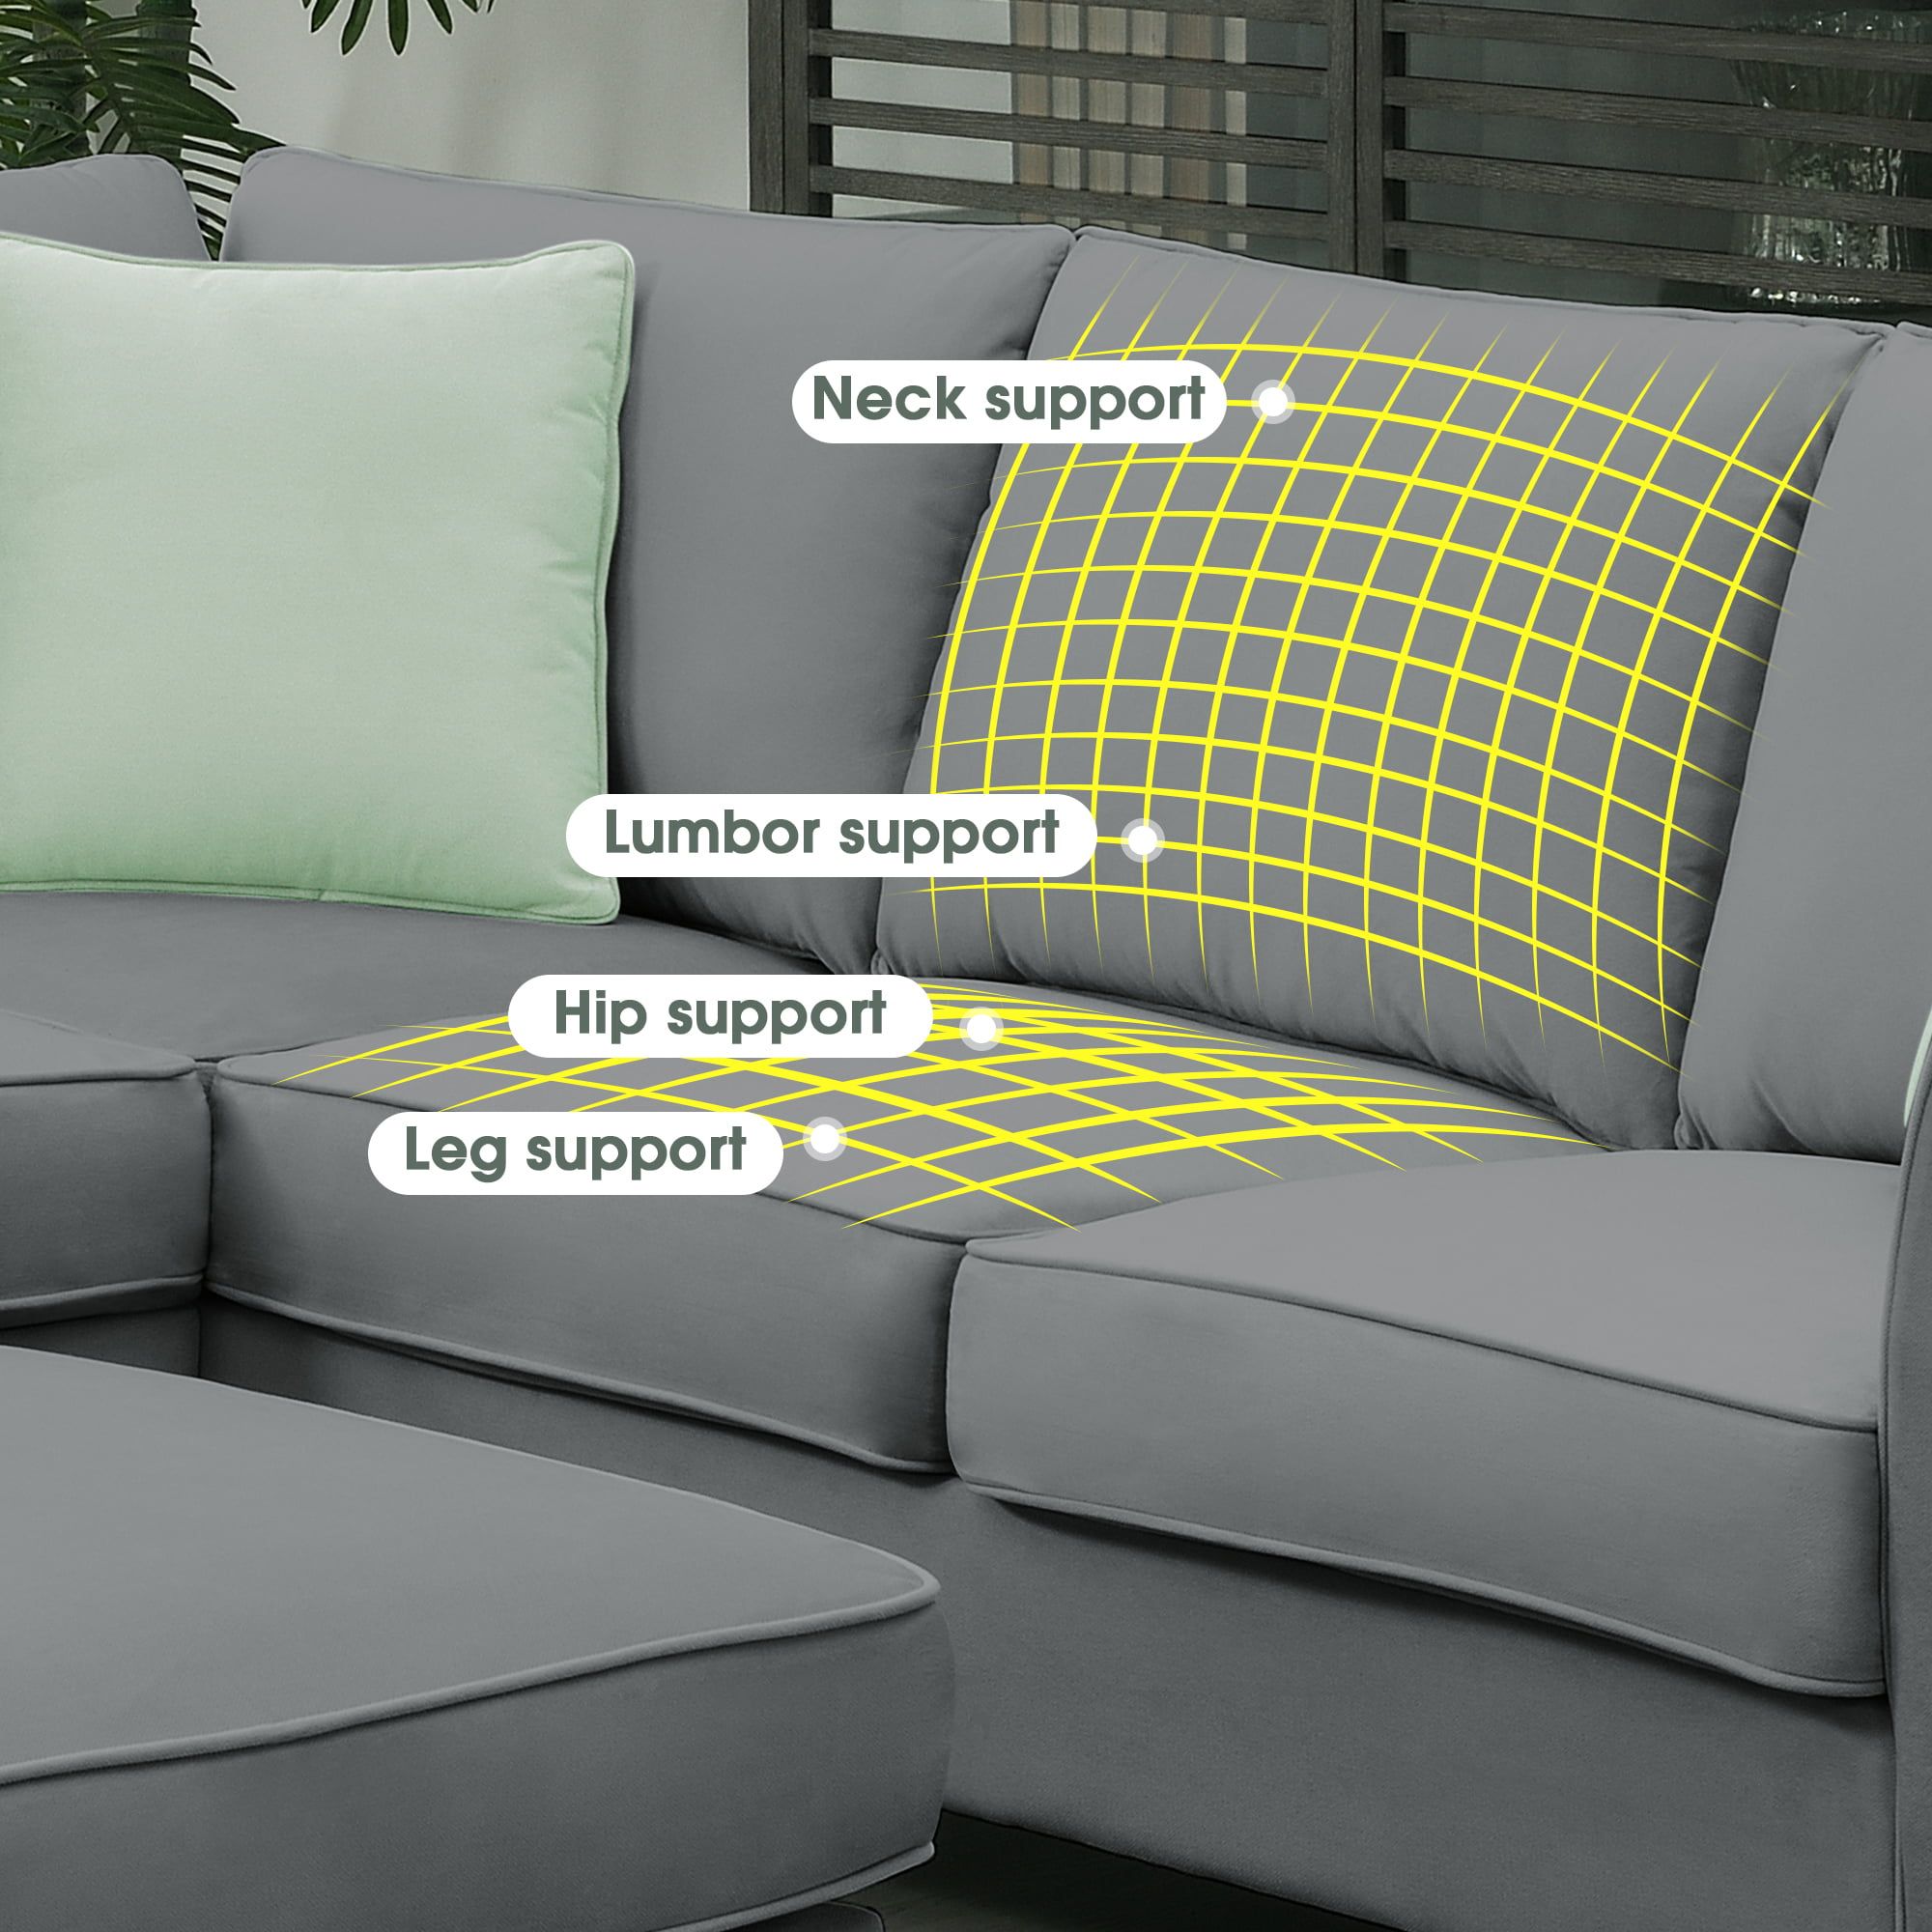 L Shaped Modular Sectional Couch, Kamida 7 Seater Sectional Couch With  Ottoman And 3 Pillows, Modern L Shaped Fabric Upholstered Couch Furniture,  Heavy Duty Sectional Couch For Living Room, Gray – Walmart For 7 Seater Sectional Couch With Ottoman And 3 Pillows (Photo 5 of 15)